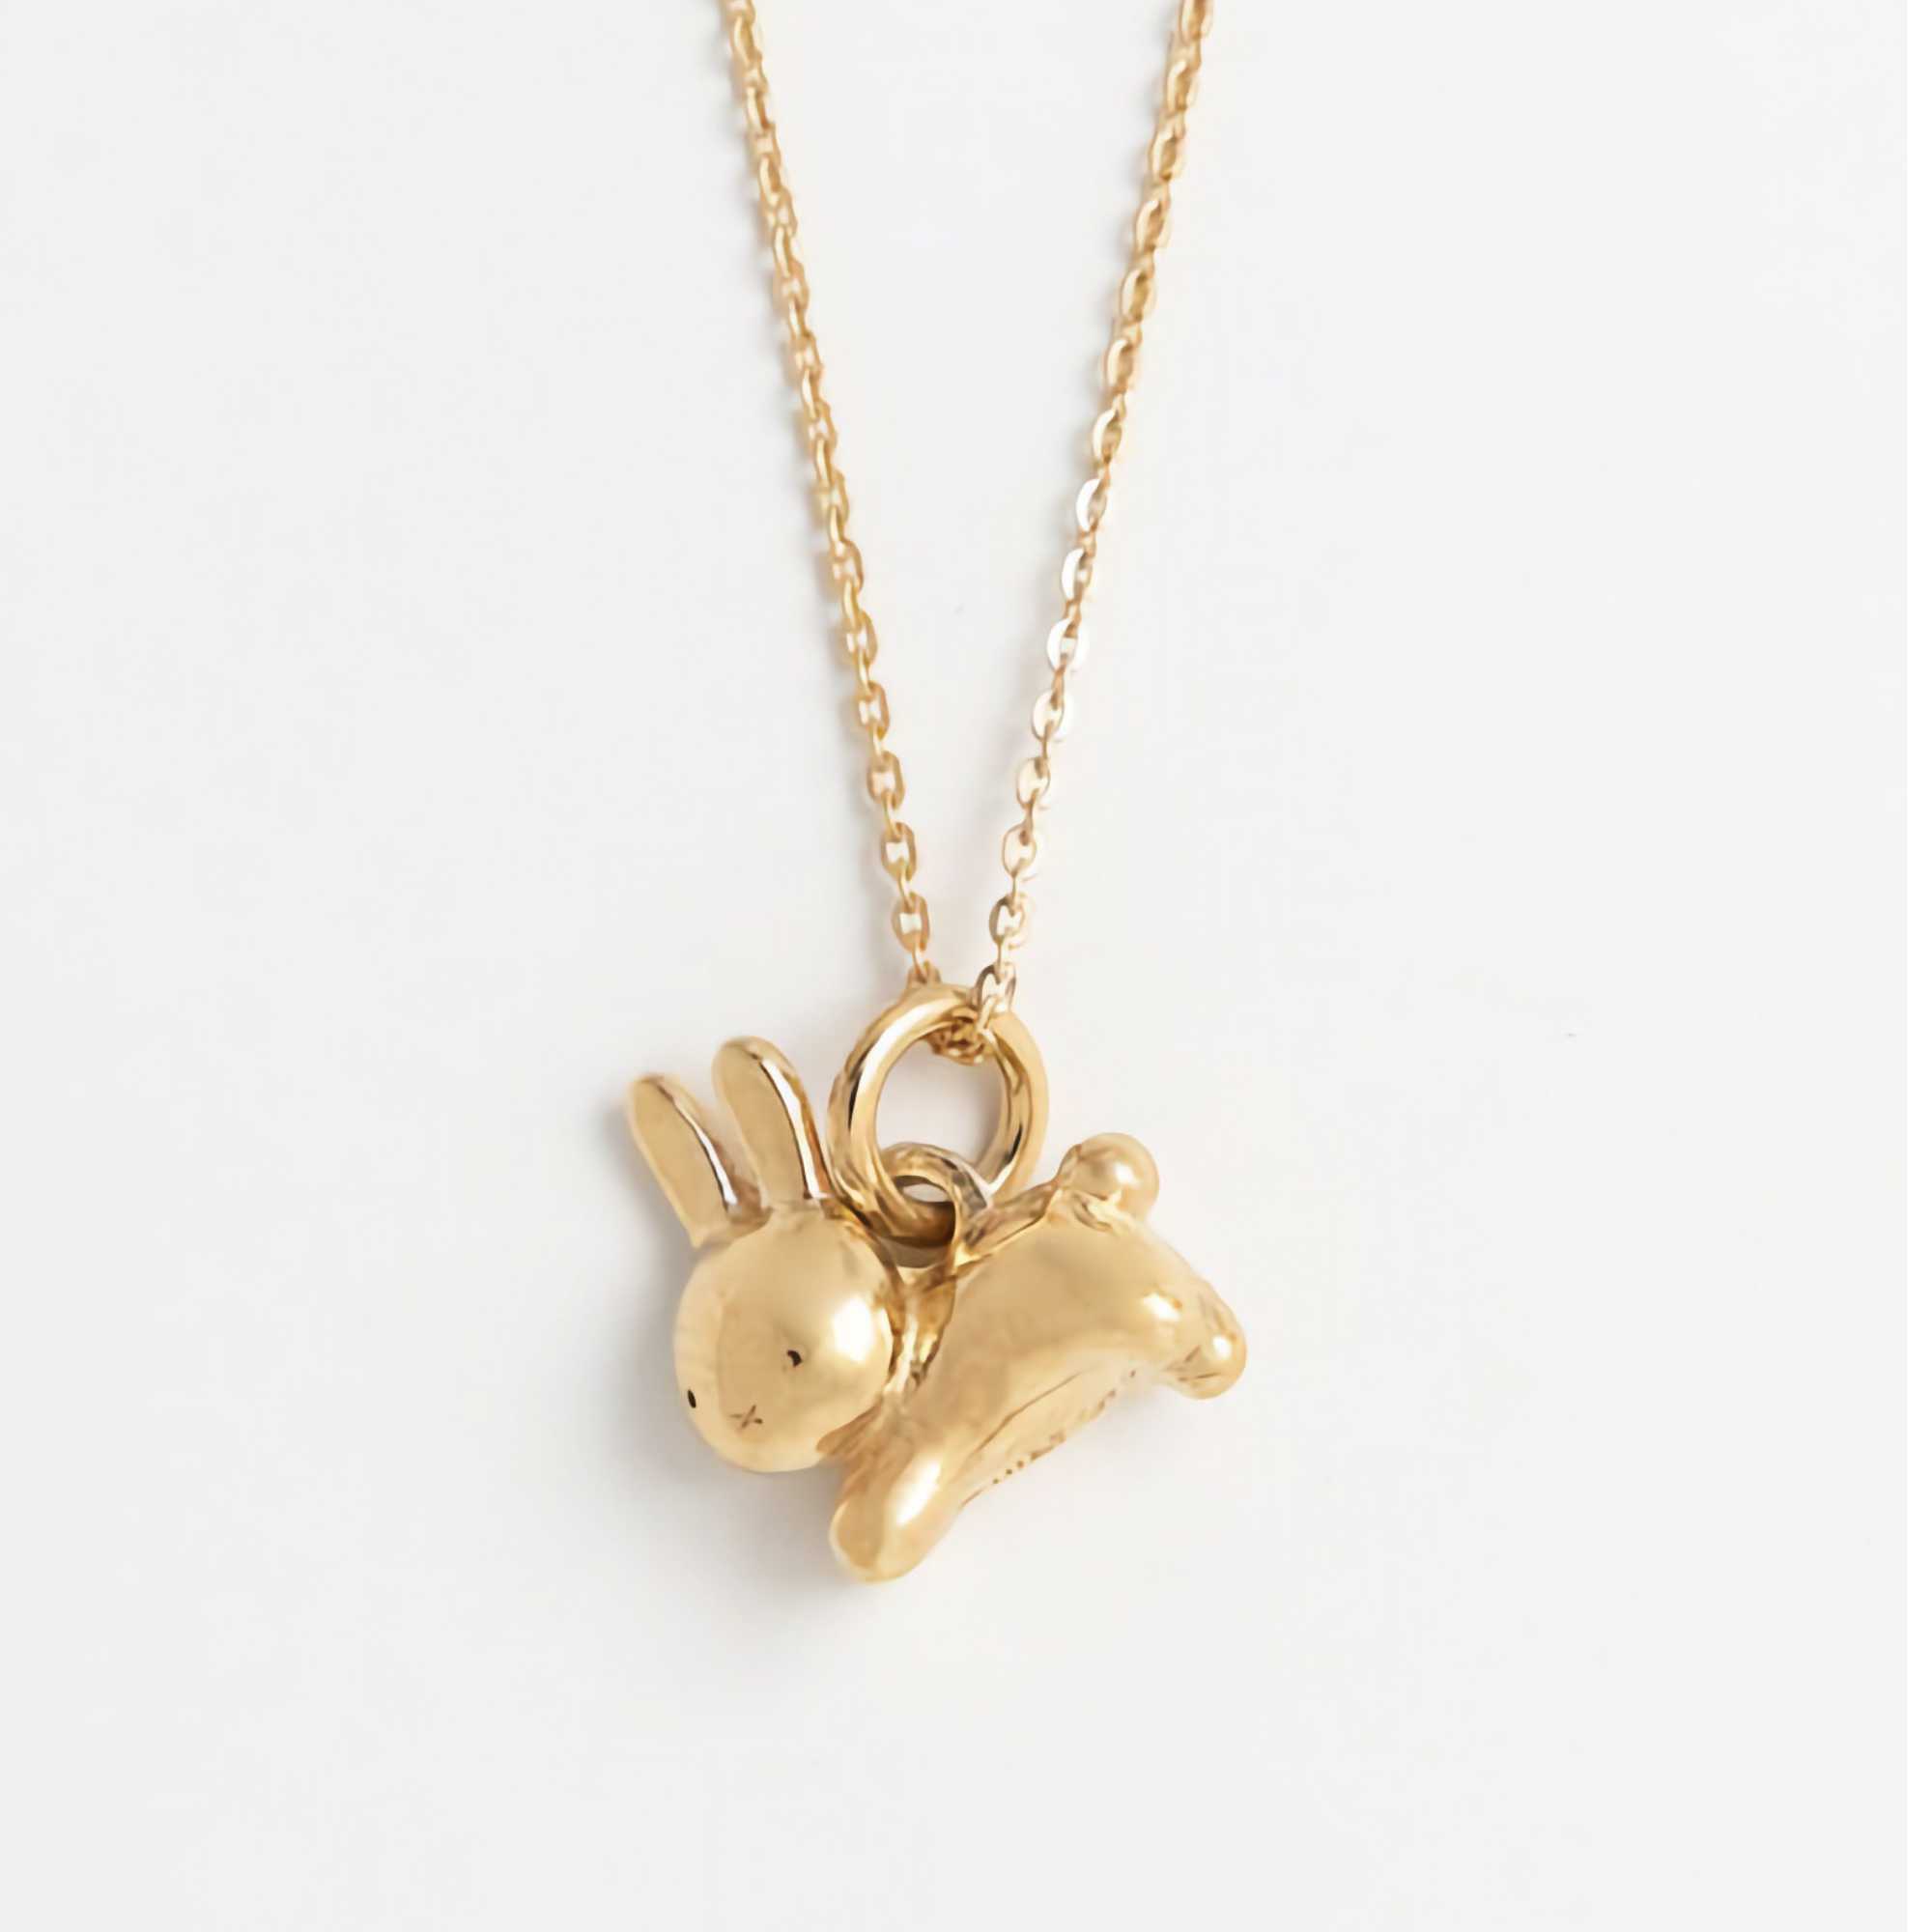 Miffy Leaping Rabbit Charm Necklace, Gold Vermeil